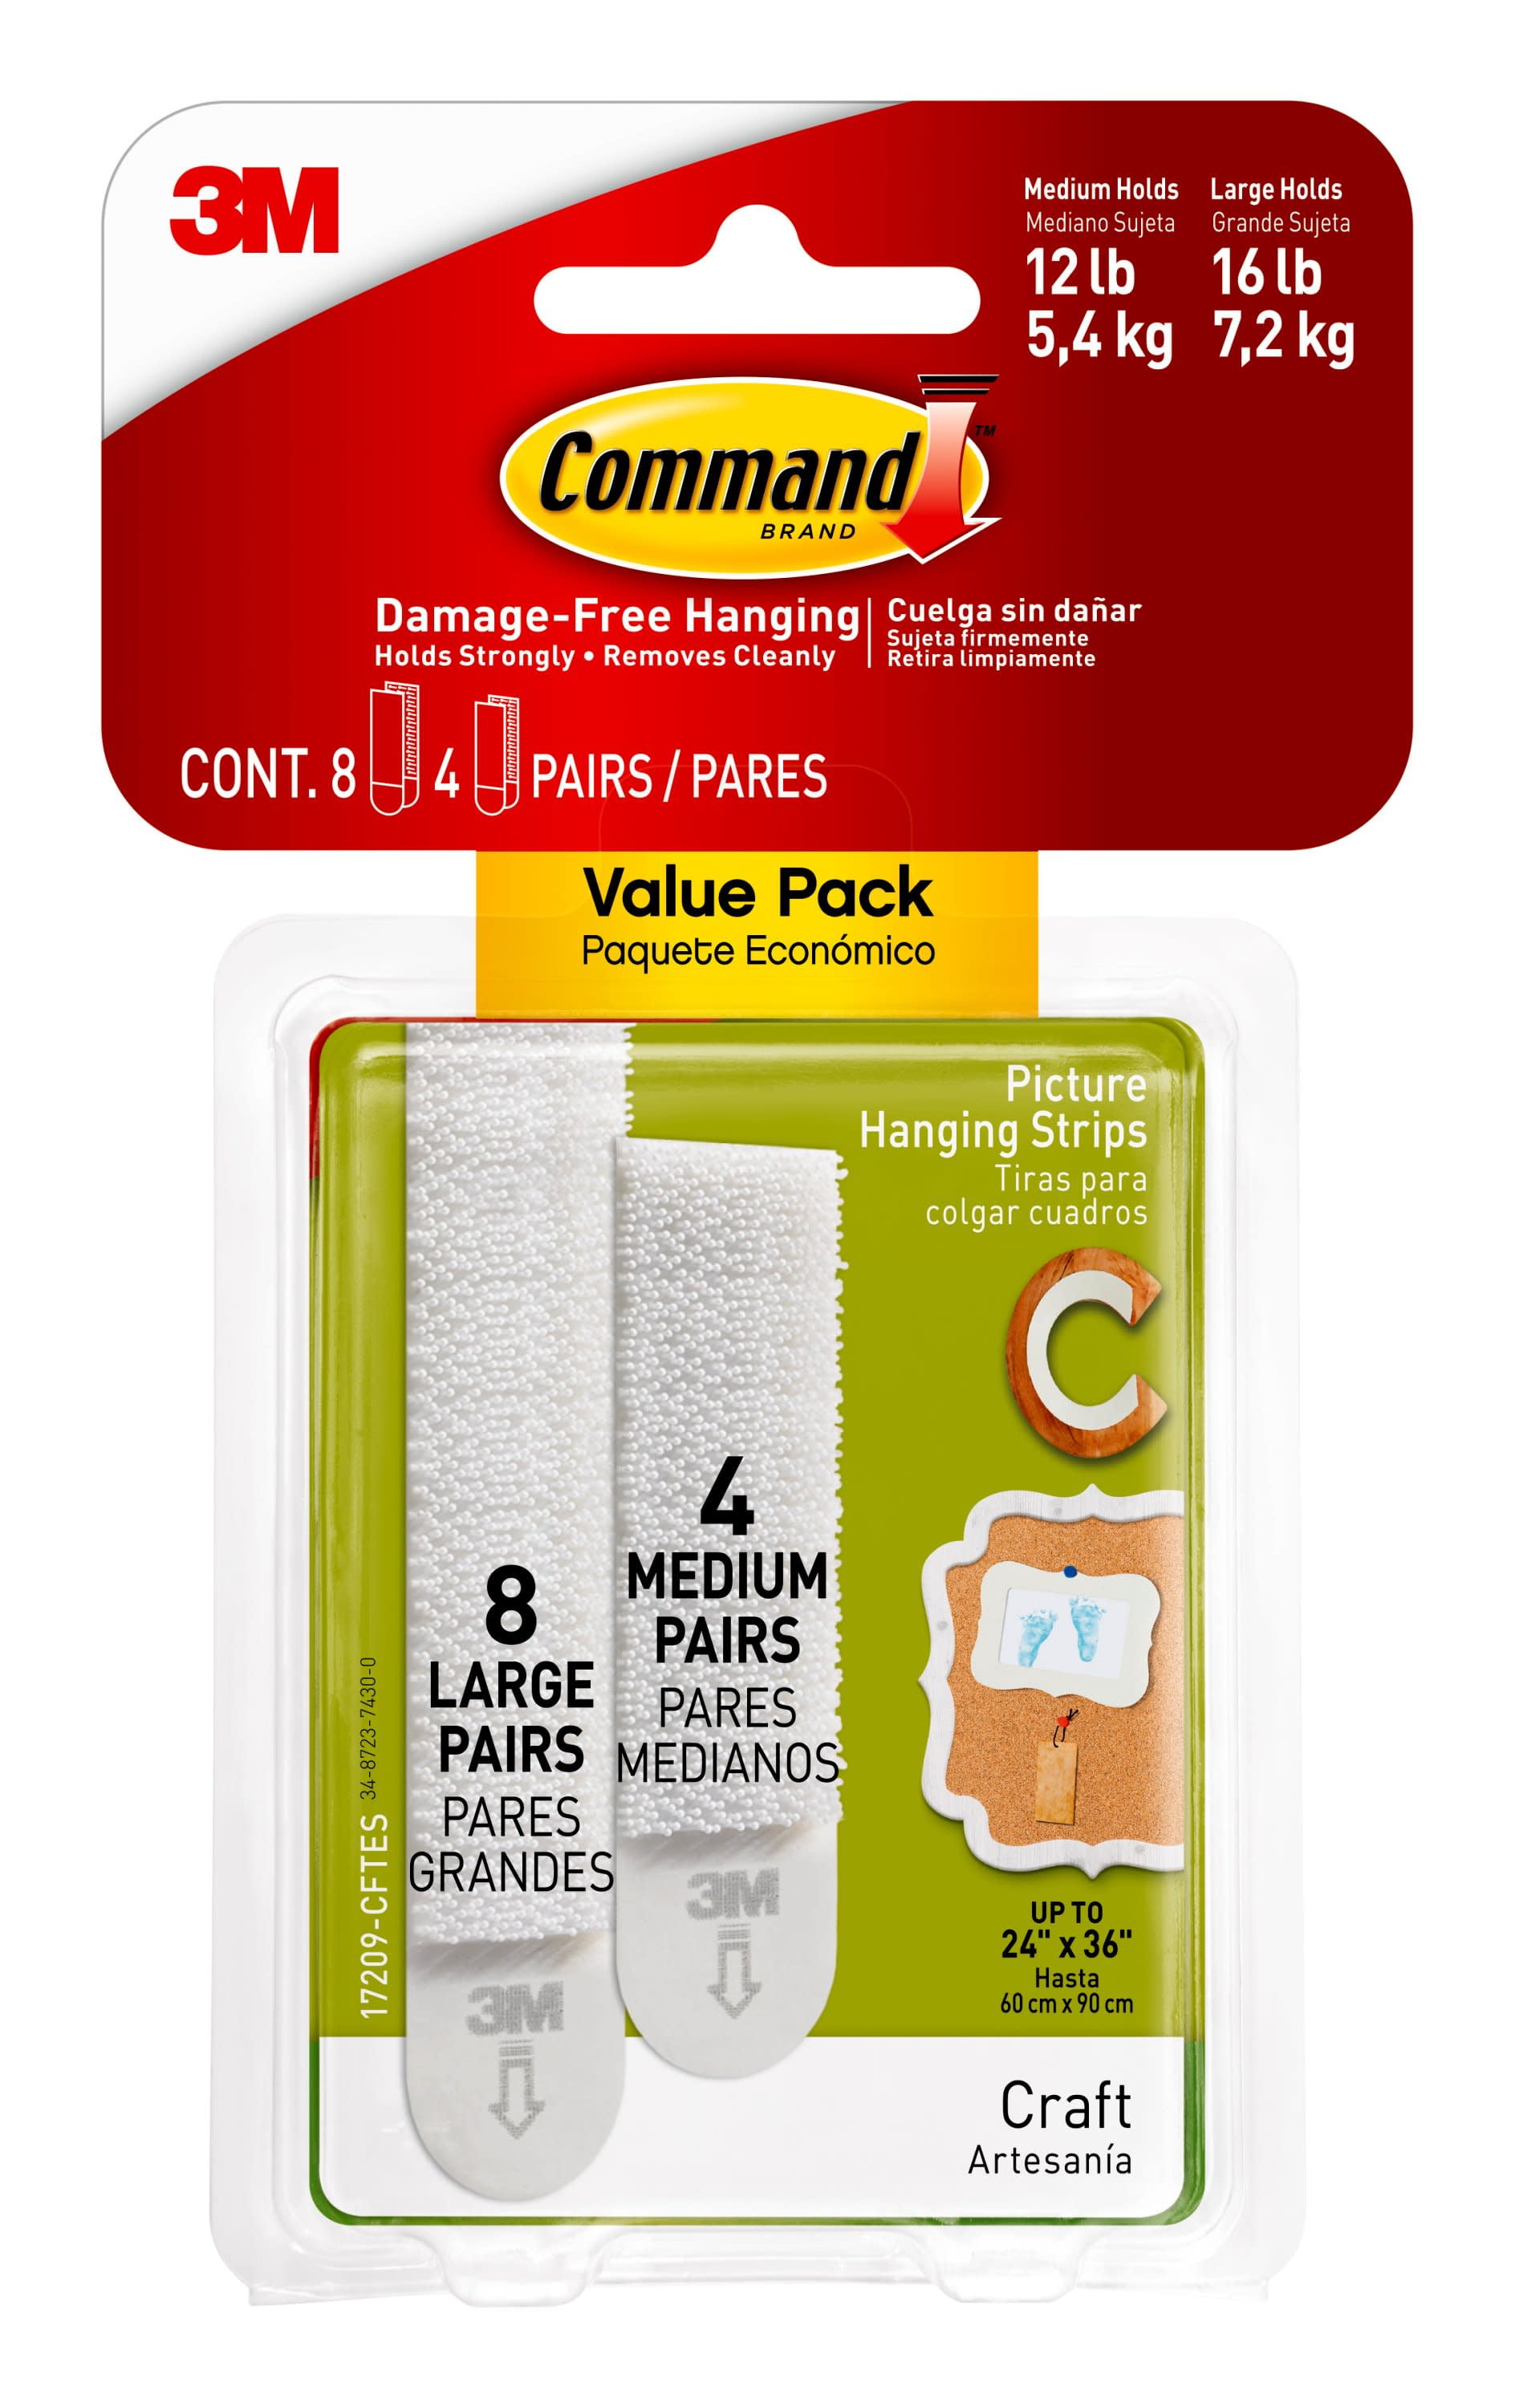 Command Medium and Large Picture Hanging Strips, White, Damage Free Decorating, 4 Medium Pairs and 8 Large Pairs